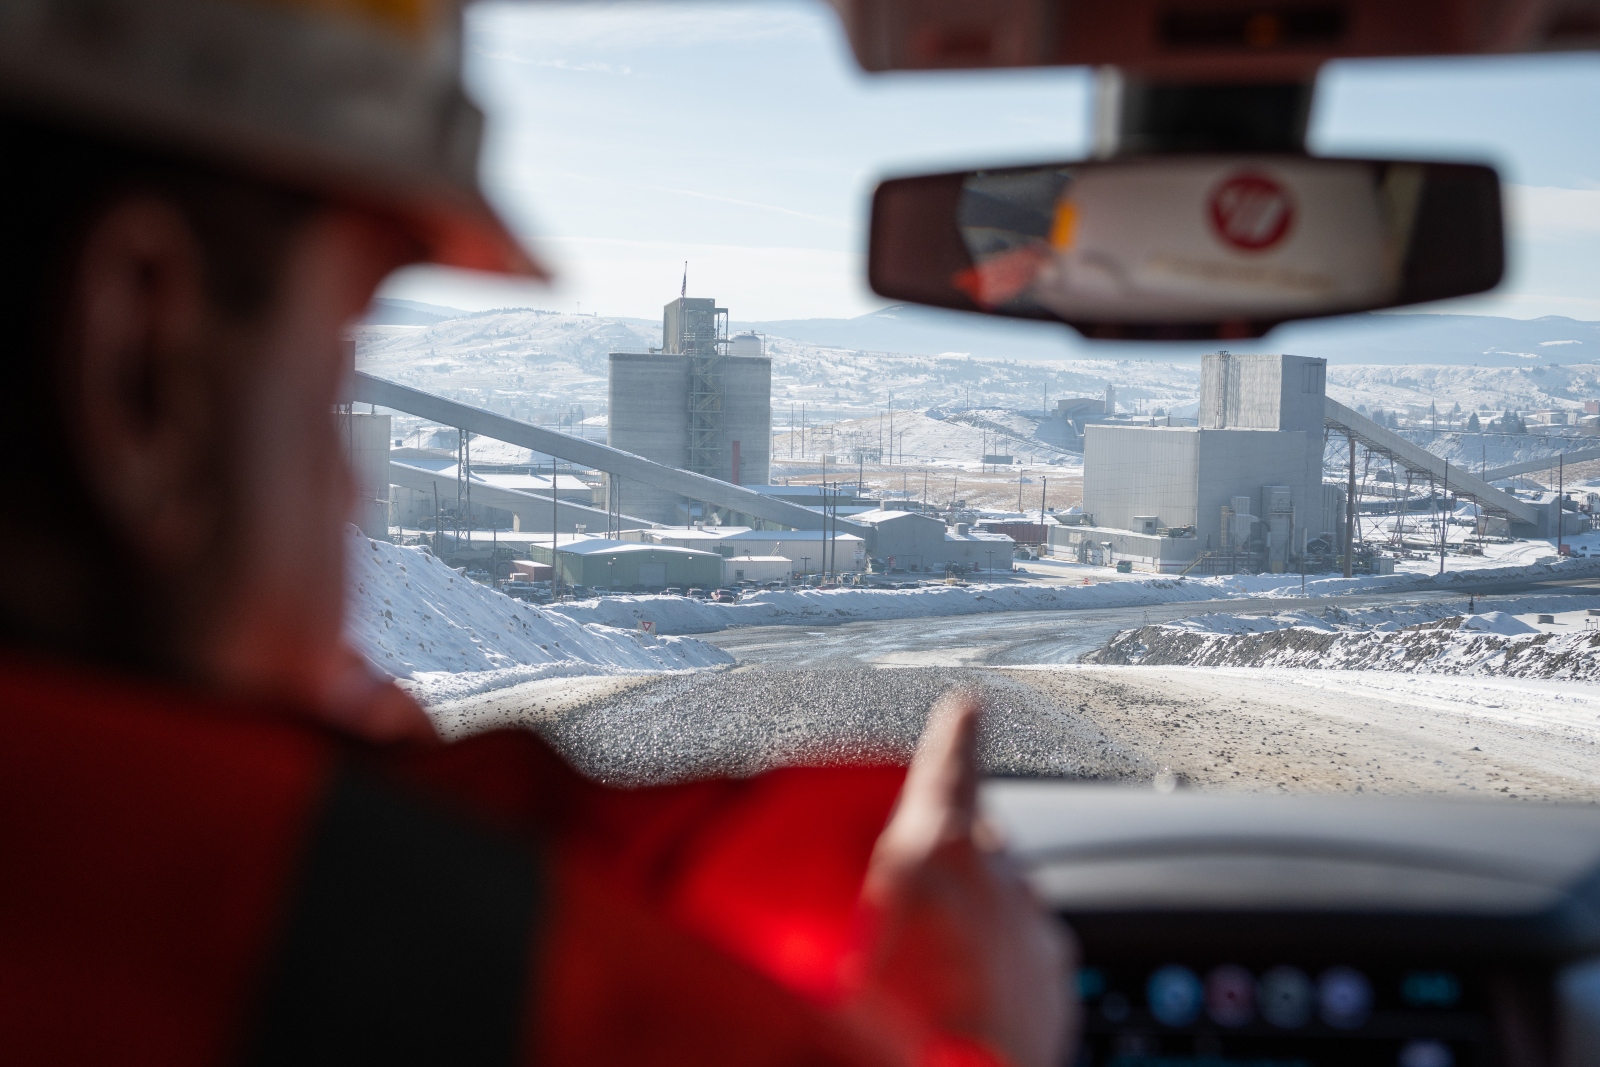 A man in a hard hat drives his car, and there's a view of a mine from his windshield.